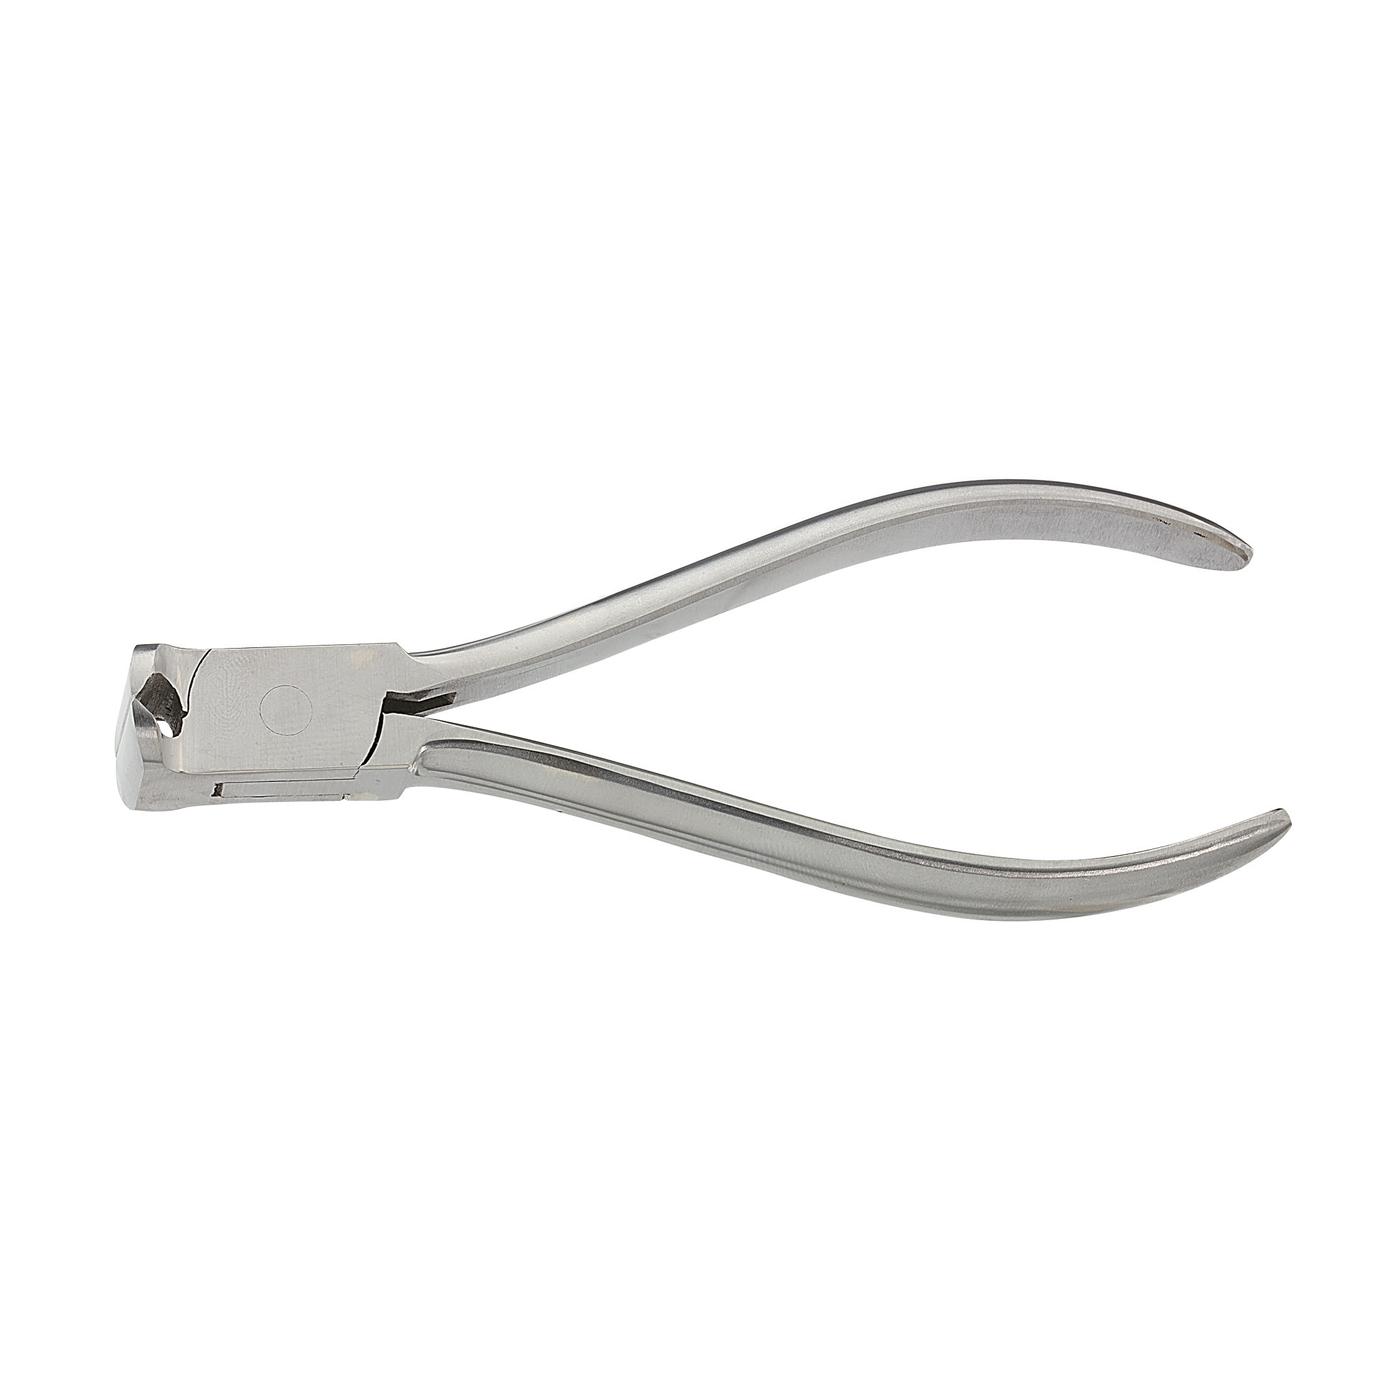 End Cutting Nippers, Nickel-Plated, with Chamfer, 130 mm - 1 piece